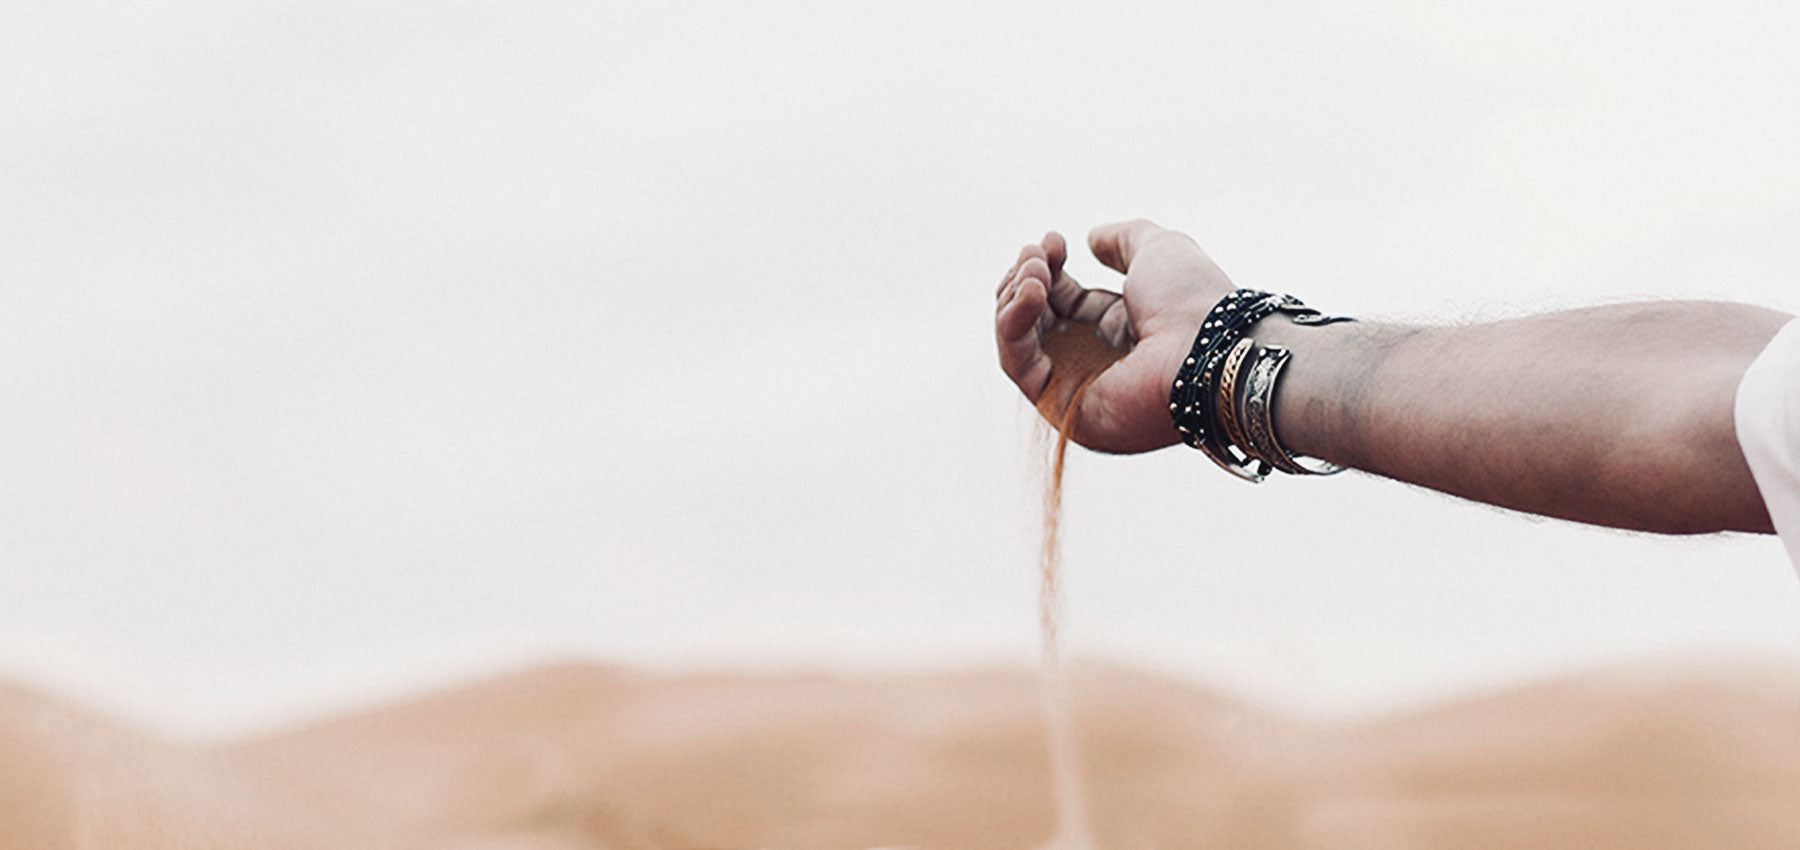 Hand with sand falling out of it with desert in the background